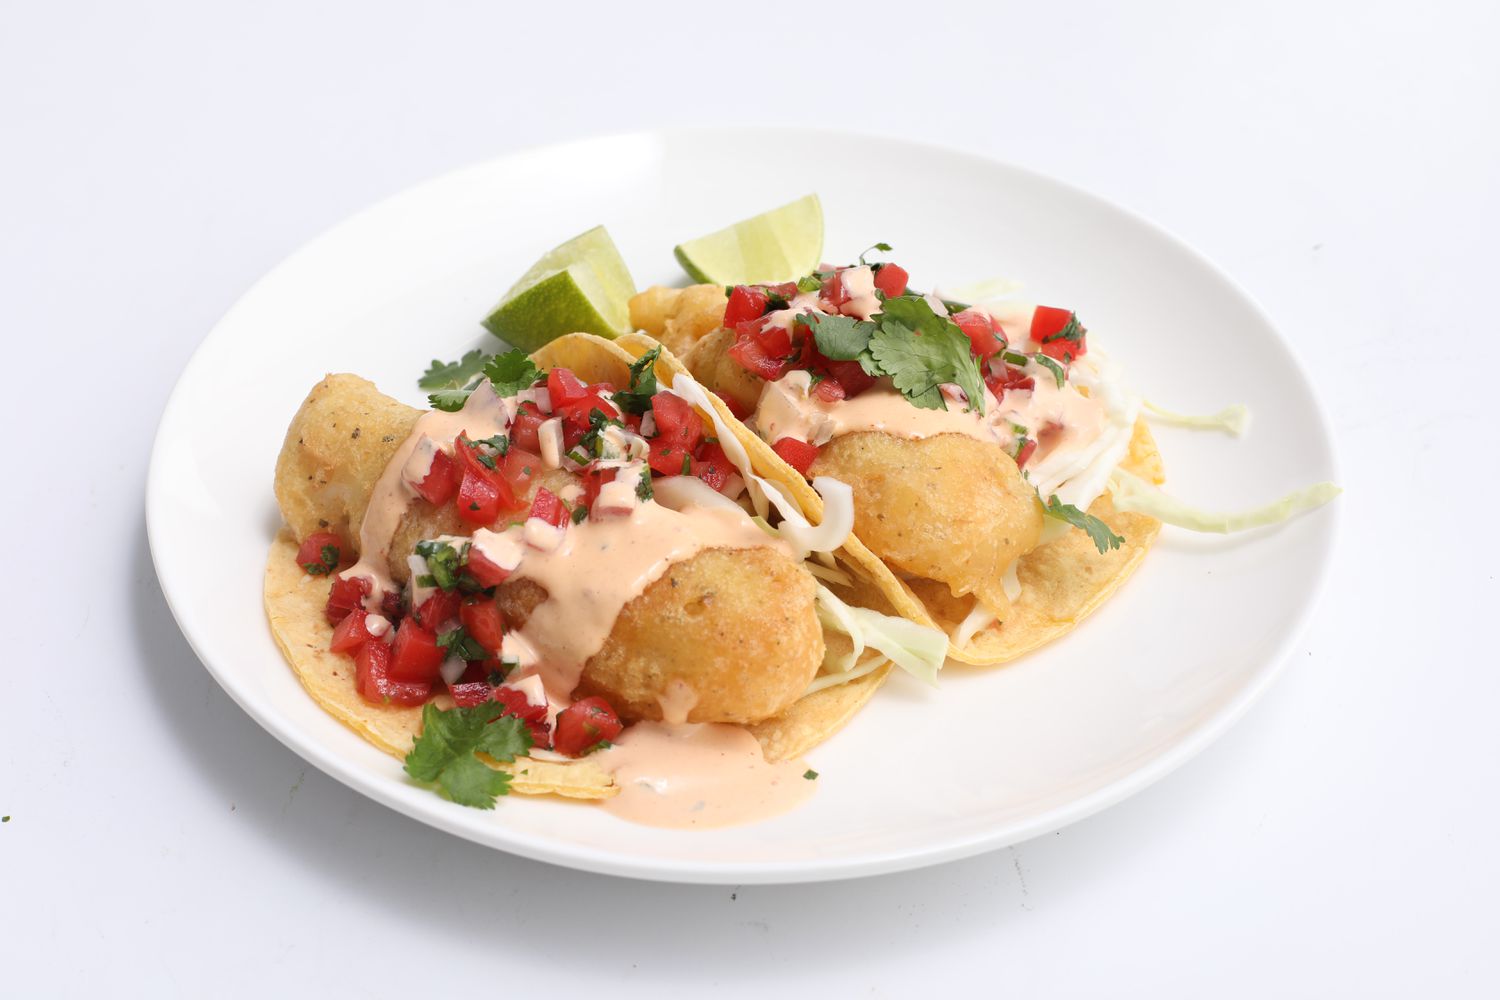 Two fried fish tacos made with corn tortillas and topped with a creamy chipotle sauce and pico de gallo